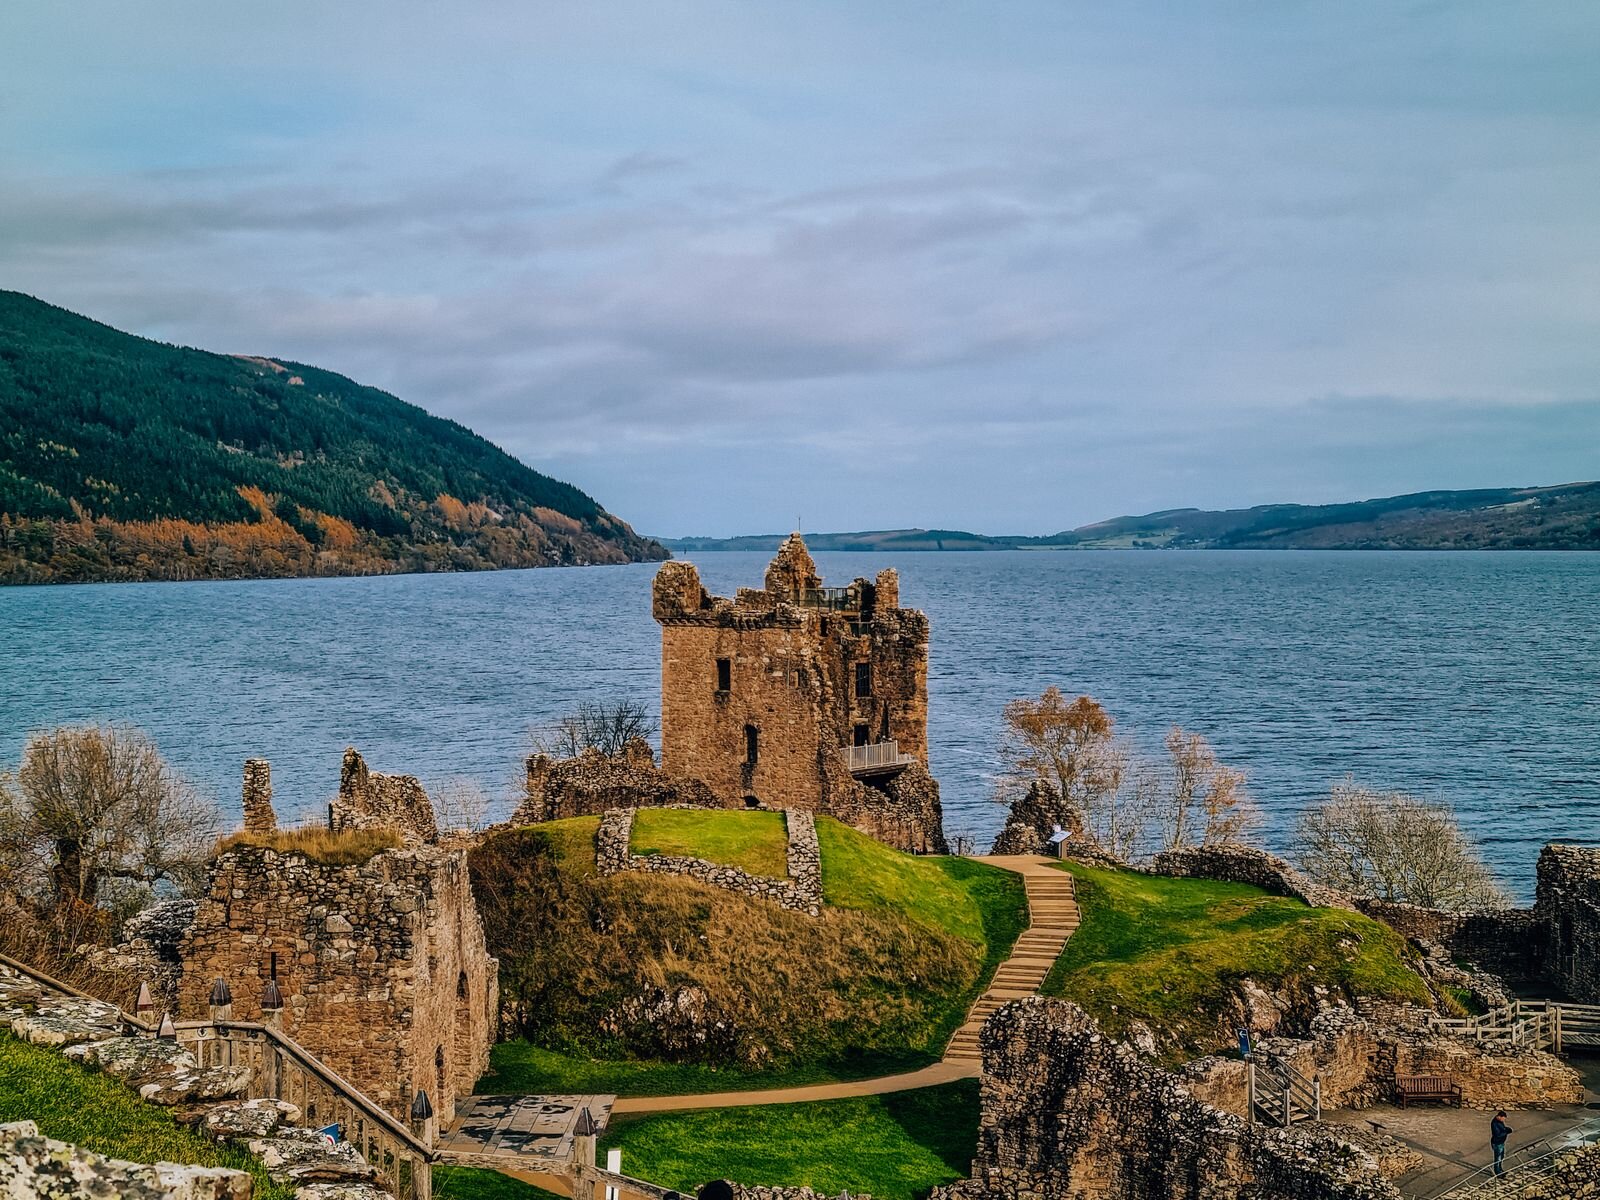 Castle ruins of Urquhart Castle on Loch Ness Scotland. The ruins are at the top of a grassy slope with the loch behind it